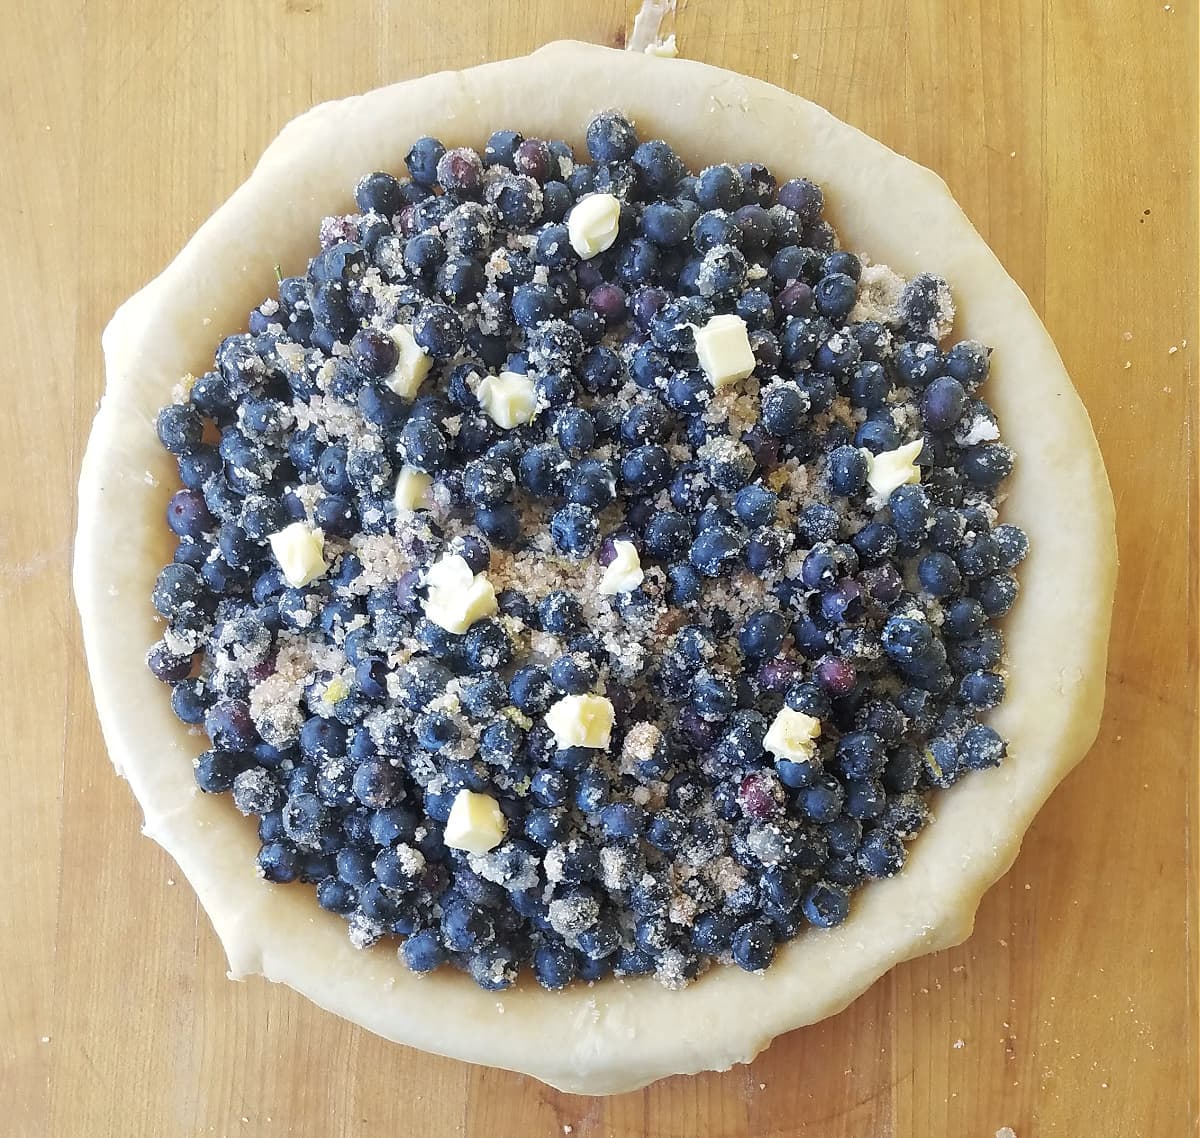 Blueberry pie filling poured into an unbaked pastry crust.